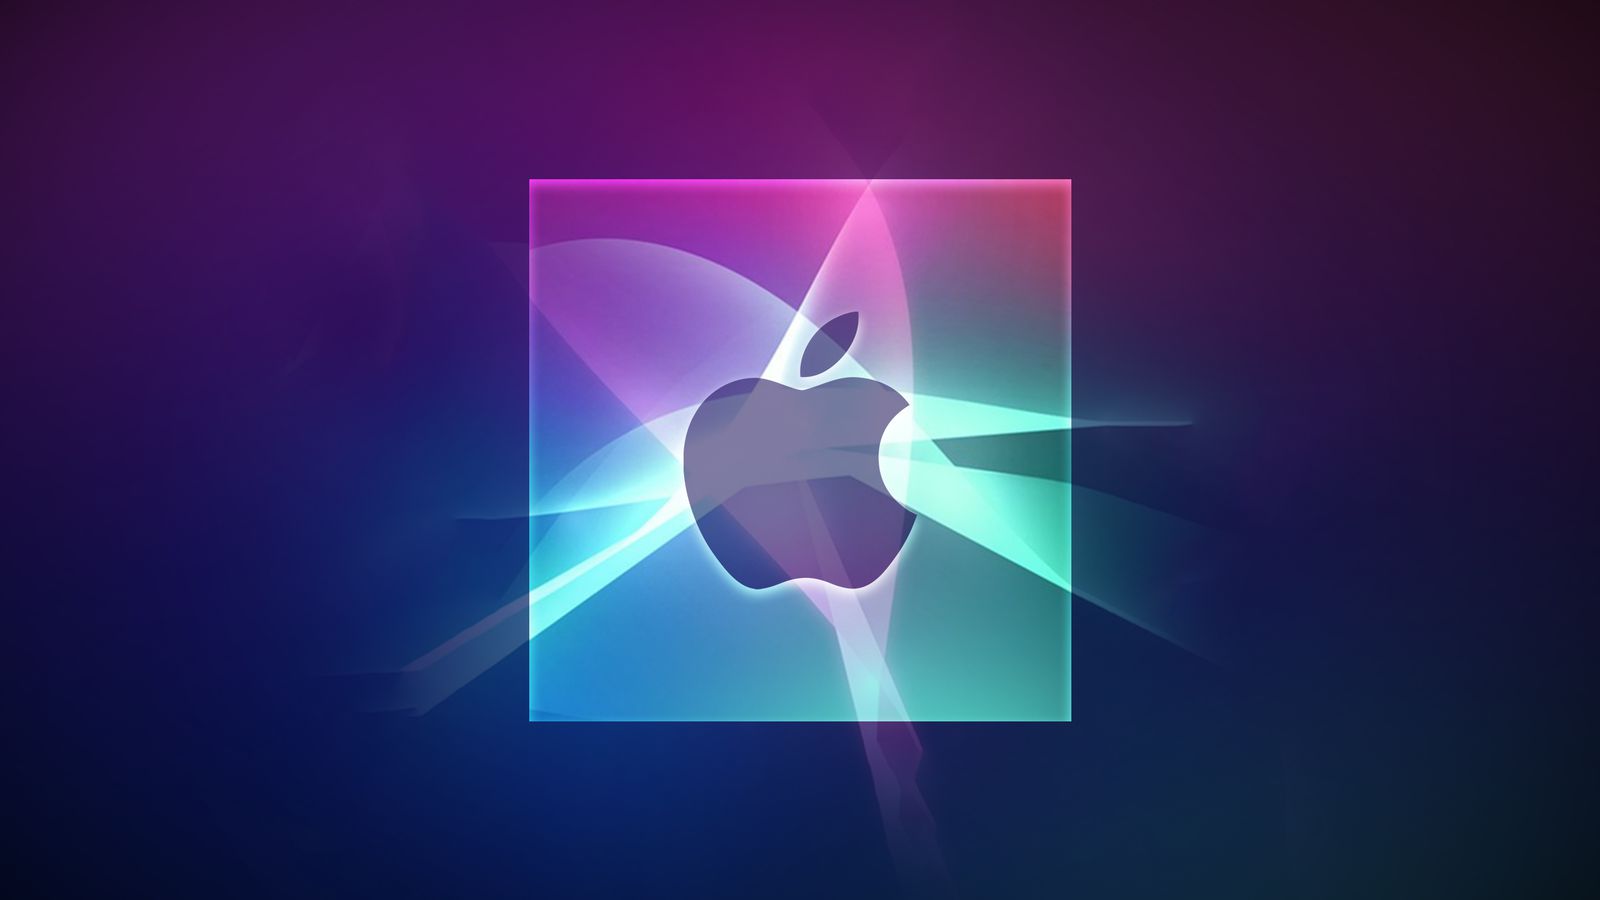 From iPhoneIslam.com, Apple logo on a gradient background of purple and blue tones, enhanced with light and shadow effects, highlighted in this week's Fringe News